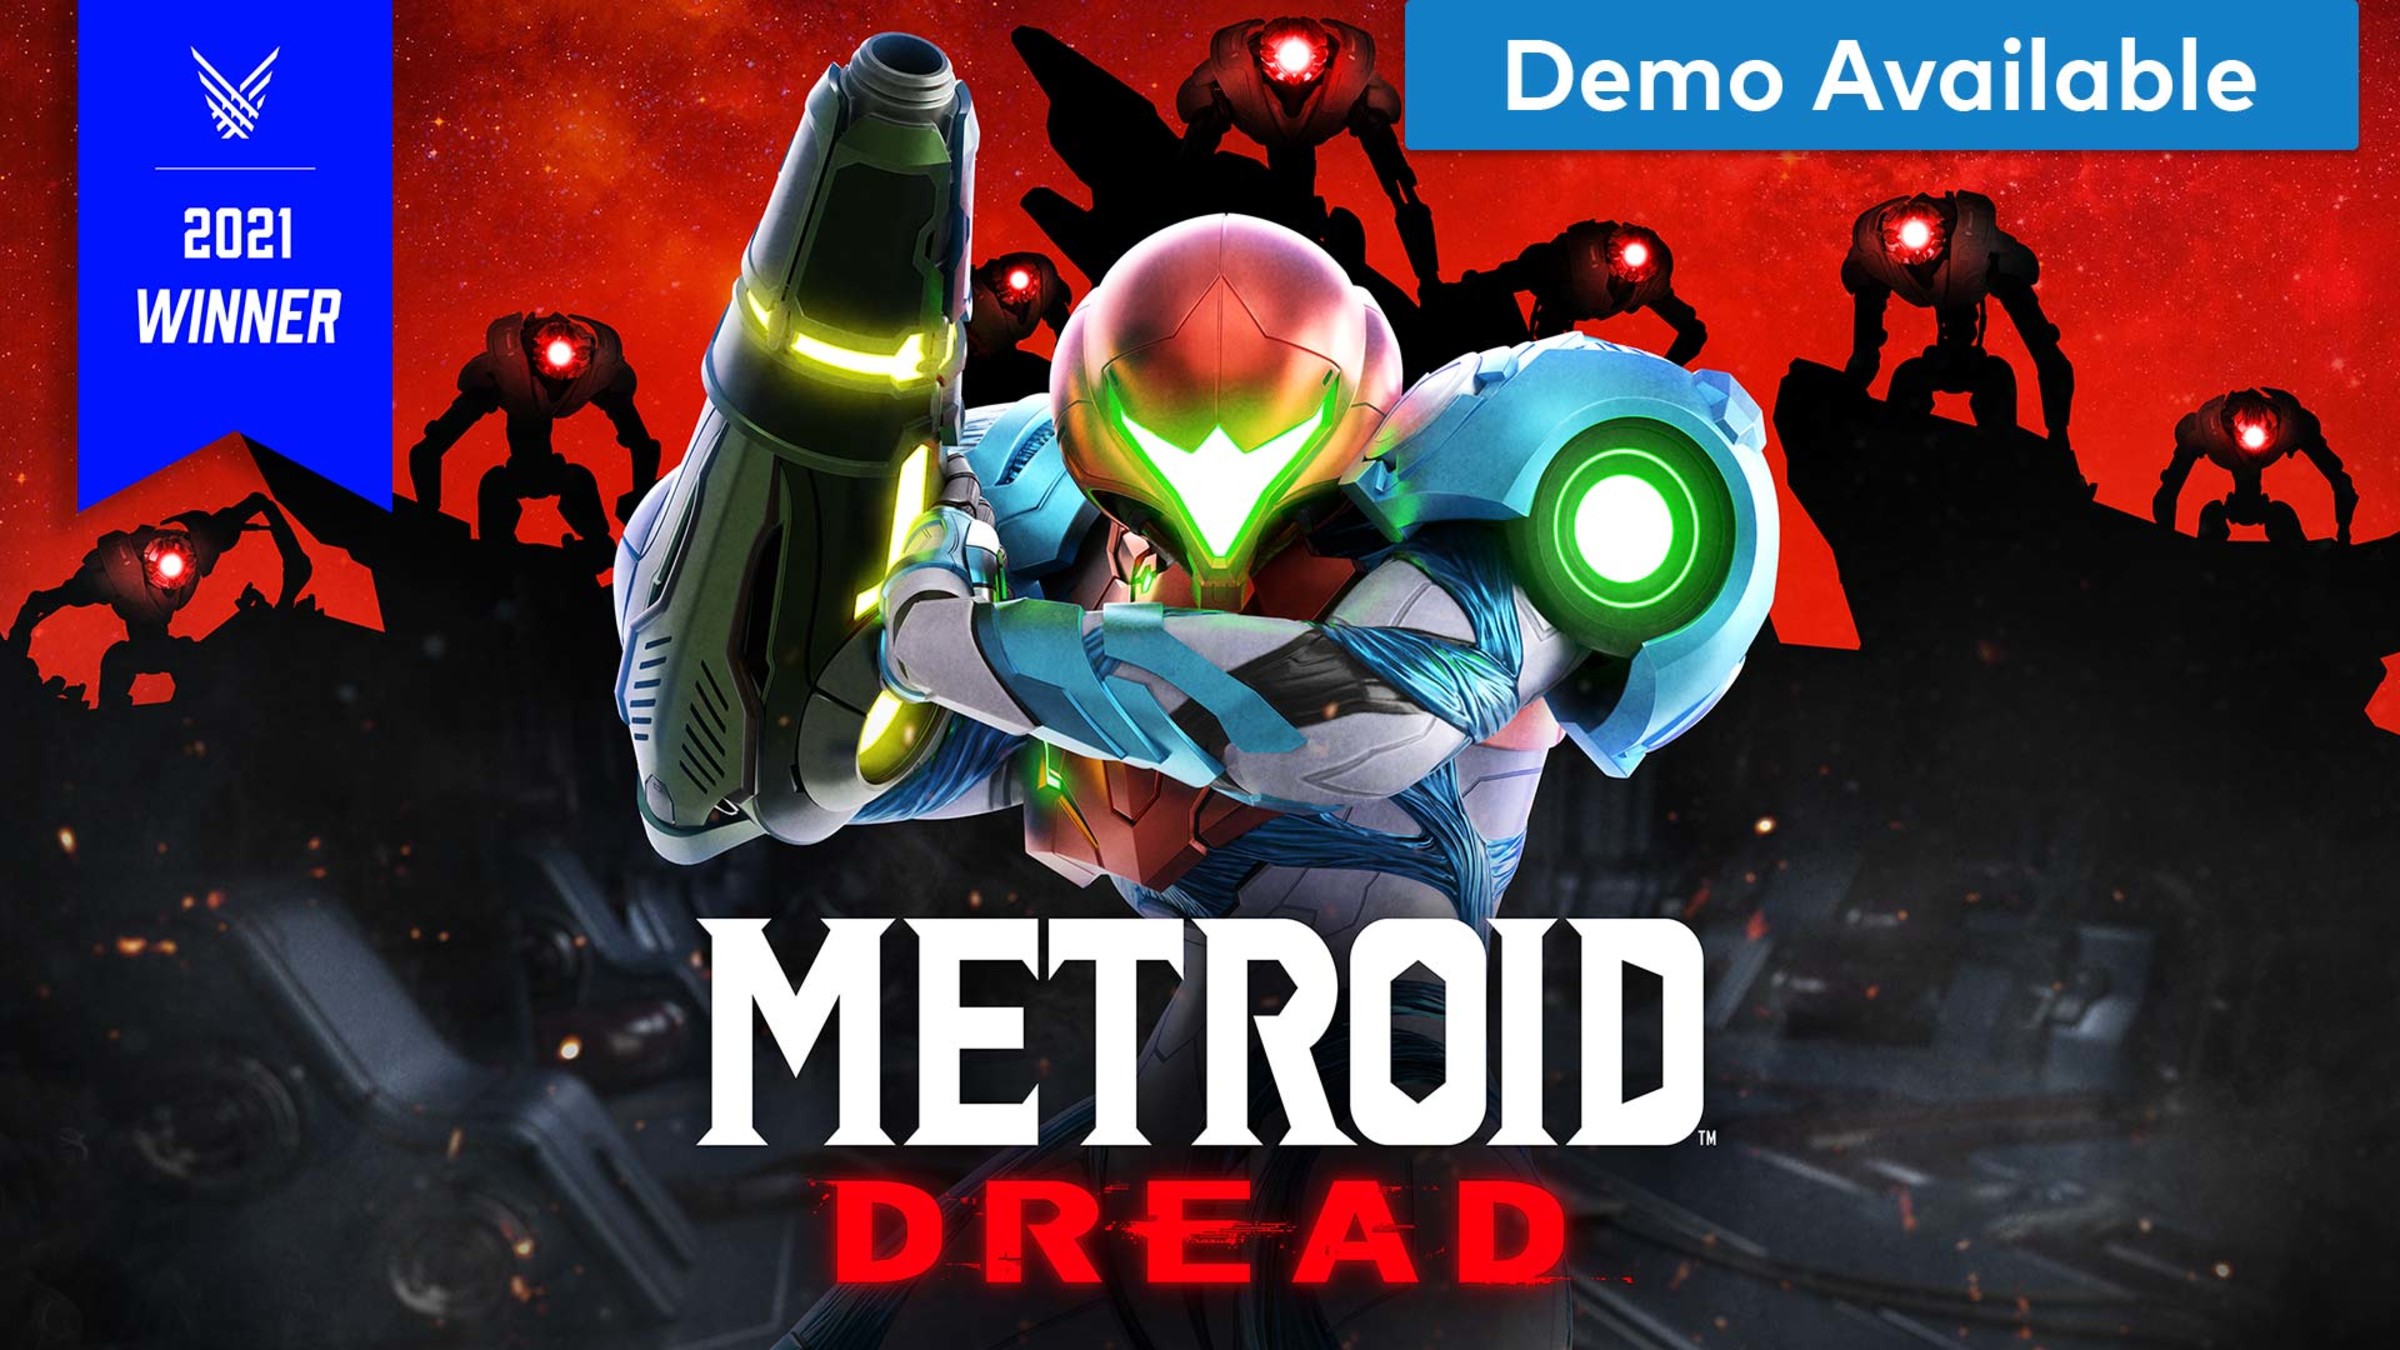 Site Official Switch - Metroid™ Nintendo Nintendo for Dread